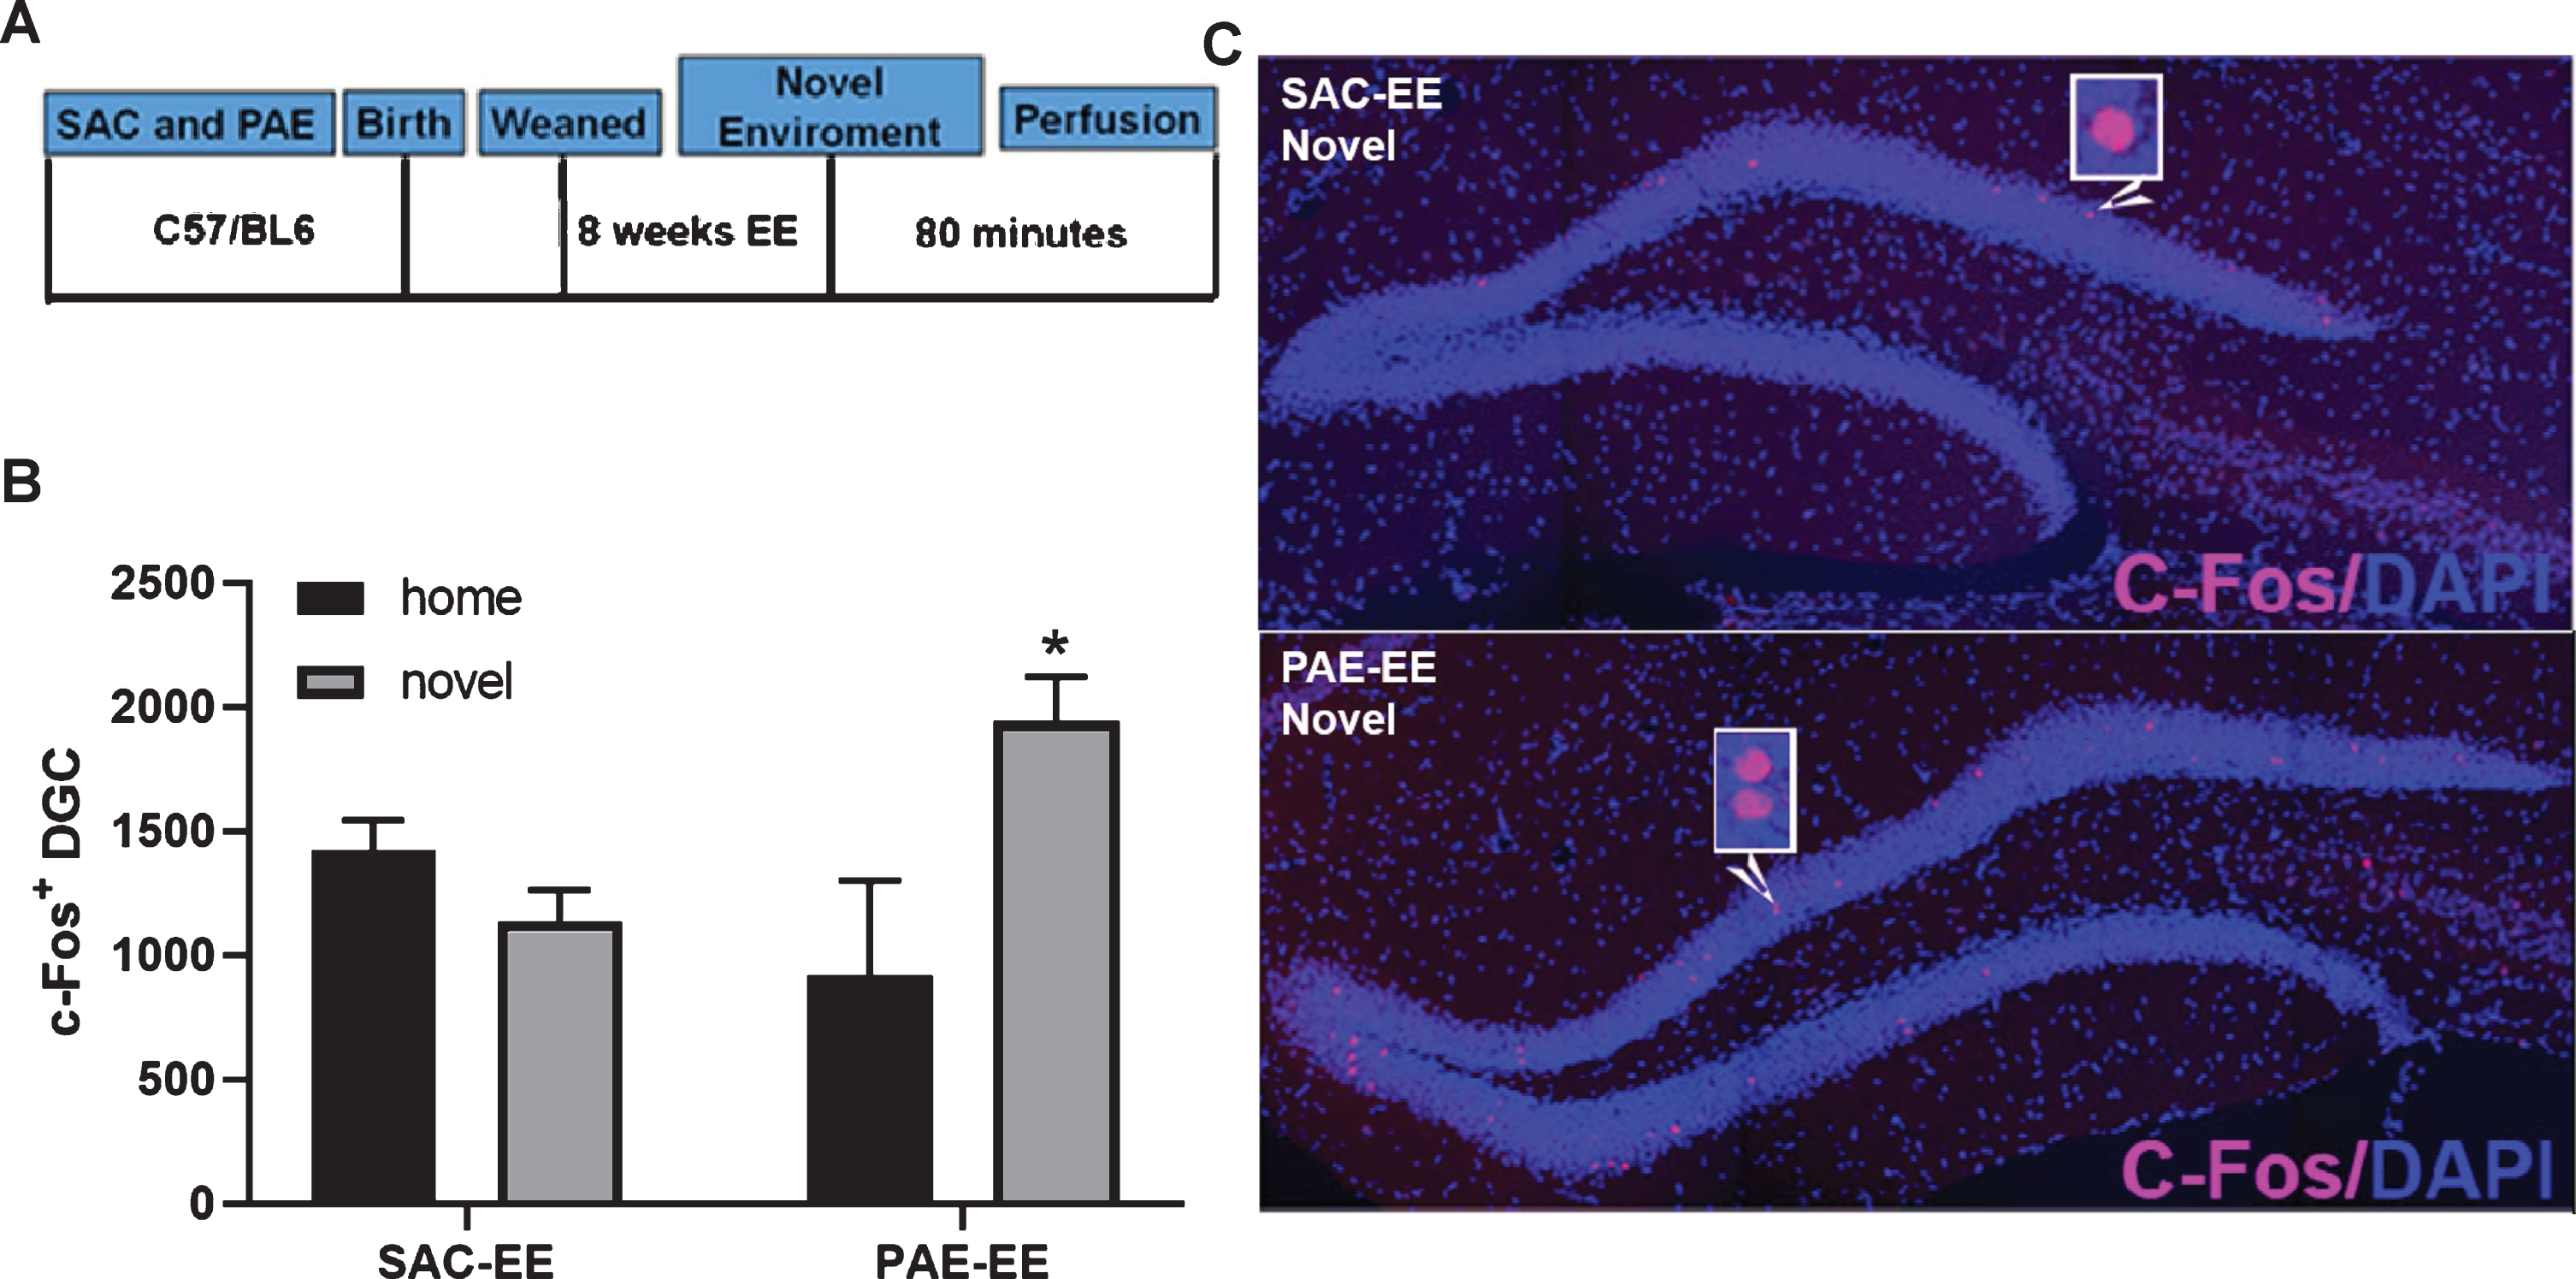 PAE-EE mice display broadened novelty-induced c-Fos expression within the dentate gyrus compared to SAC-EE mice. A. Experimental timeline. SAC and PAE C57Bl6/J mice were exposed to EE housing conditions for 8 weeks (SAC-EE and PAE-EE). Mice were then exposed to a novel environment for 30 minutes and sacrificed 80 minutes following return to home cage. SAC-EE and PAE-EE mice not exposed to novelty remained in home cage until sacrifice and served as controls. B. c-Fos immunofluorescence. Representative confocal images of c-Fos immunoreactivity (pink) within dorsal dentate gyrus in SAC-EE and PAE-EE mice following exposure to novel environment. Histological sections were counterstained with DAPI nuclear dye (blue). C. Quantification of c-Fos+ nuclei within the suprapyramidal blade of the dorsal dentate gyrus across groups (mean±SEM). Two-way ANOVA statistics: alcohol treatment x novelty interaction [[F (1,21) = 10.03, p = 0.005]. Tukey’s post-hoc analysis revealed a significant impact of novelty on c-Fos+expression only in PAE-EE mice (*p = 0.01). Group n’s are as follows: SAC-EE home cage (n = 5 mice across 5 litters) and SAC-EE novelty (n = 7 mice across 7 litters); PAE-EE home cage (n = 5 mice across 5 litters) and PAE-EE novelty (n = 8 mice across 8 litters).